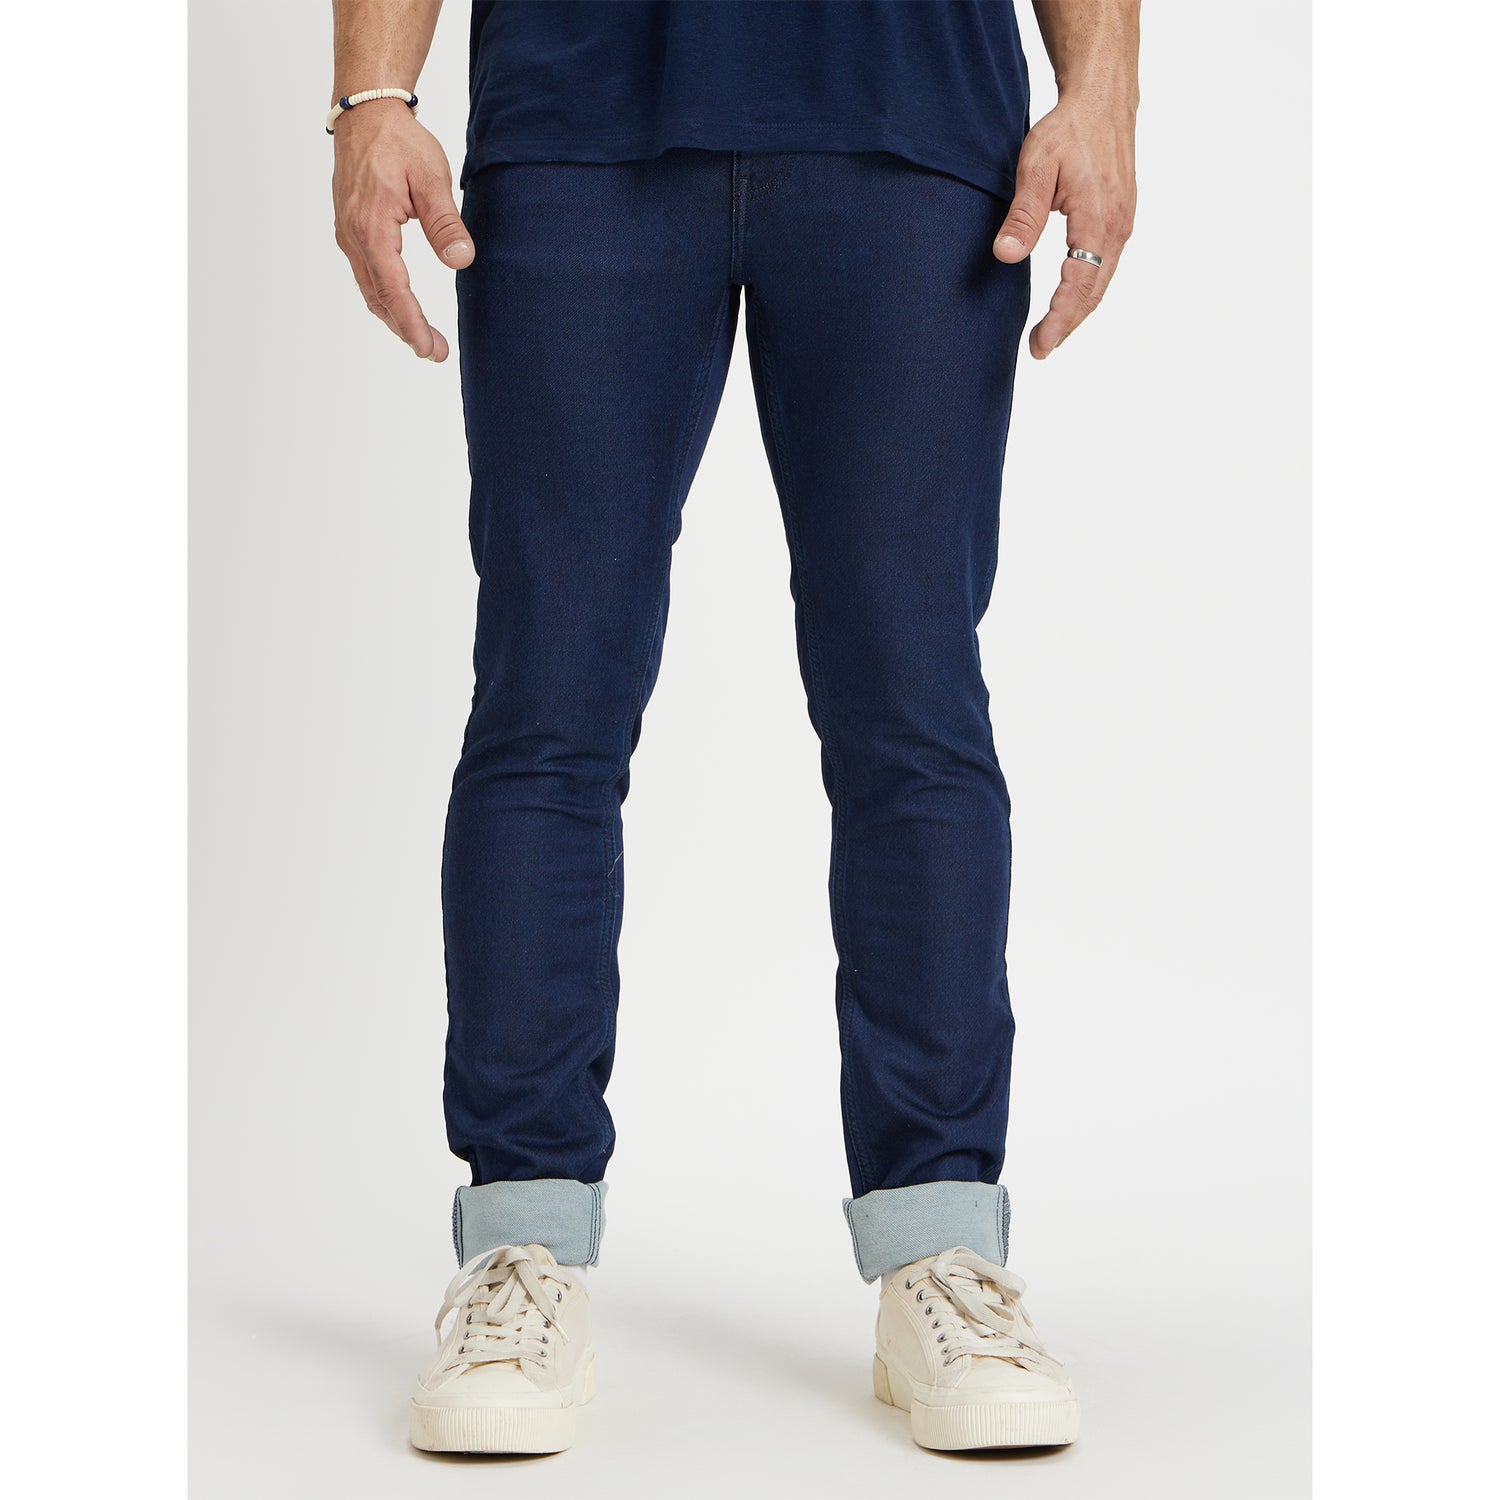 Navy Blue Mid-Rise Jean Skinny Fit Clean Look Light Fade Jeans (DOQUAD45)